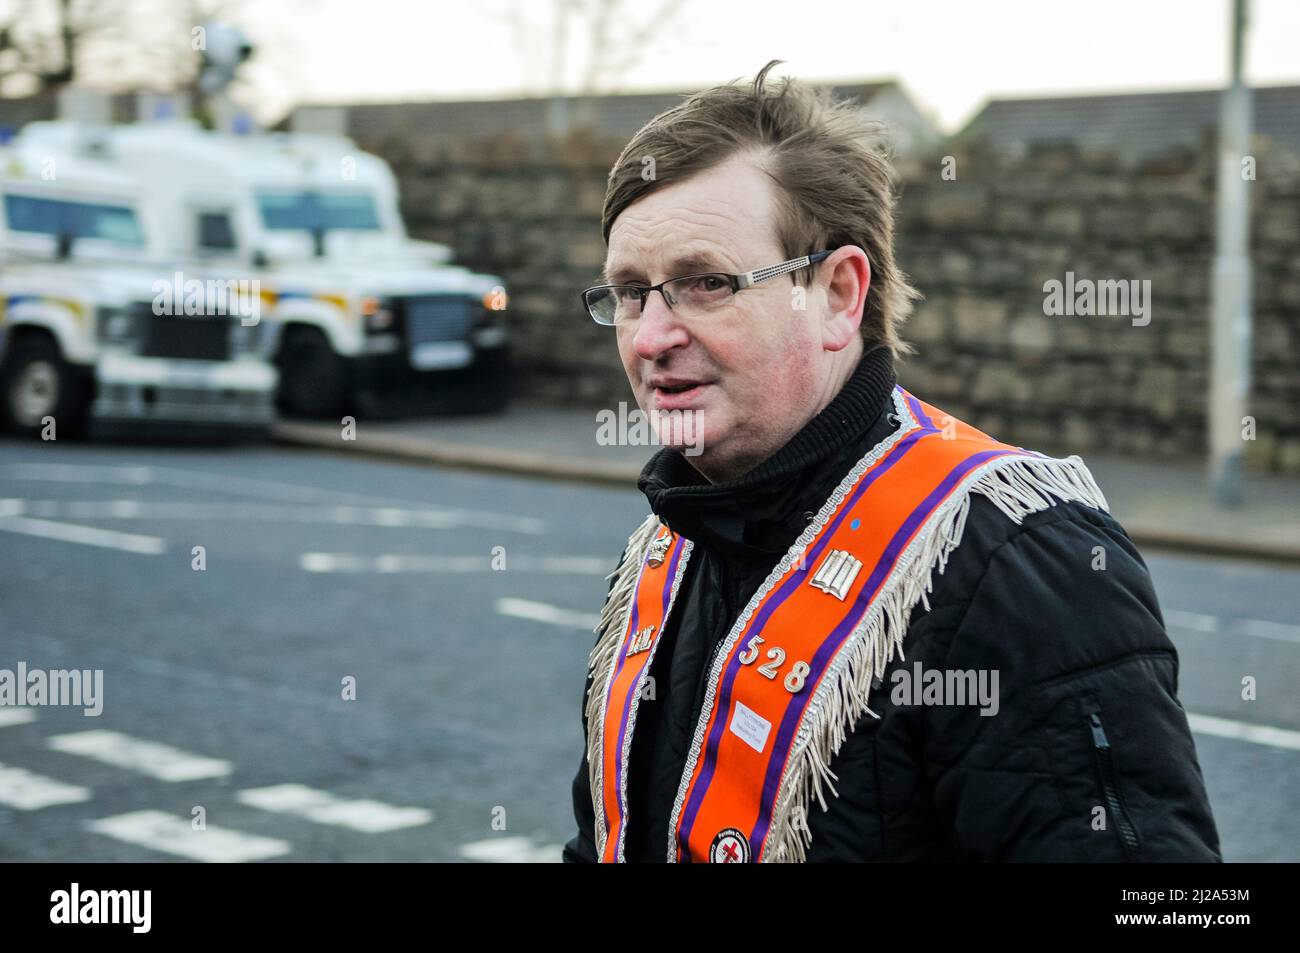 Belfast, Northern Ireland. 07 Apr 2016 - Victims campaigner Willie Frazer joins loyalists as they hold parade a to commemorate 1000 days since Ligoneil Orange Lodges were stopped from returning to their hall on 12th July 2013 Stock Photo